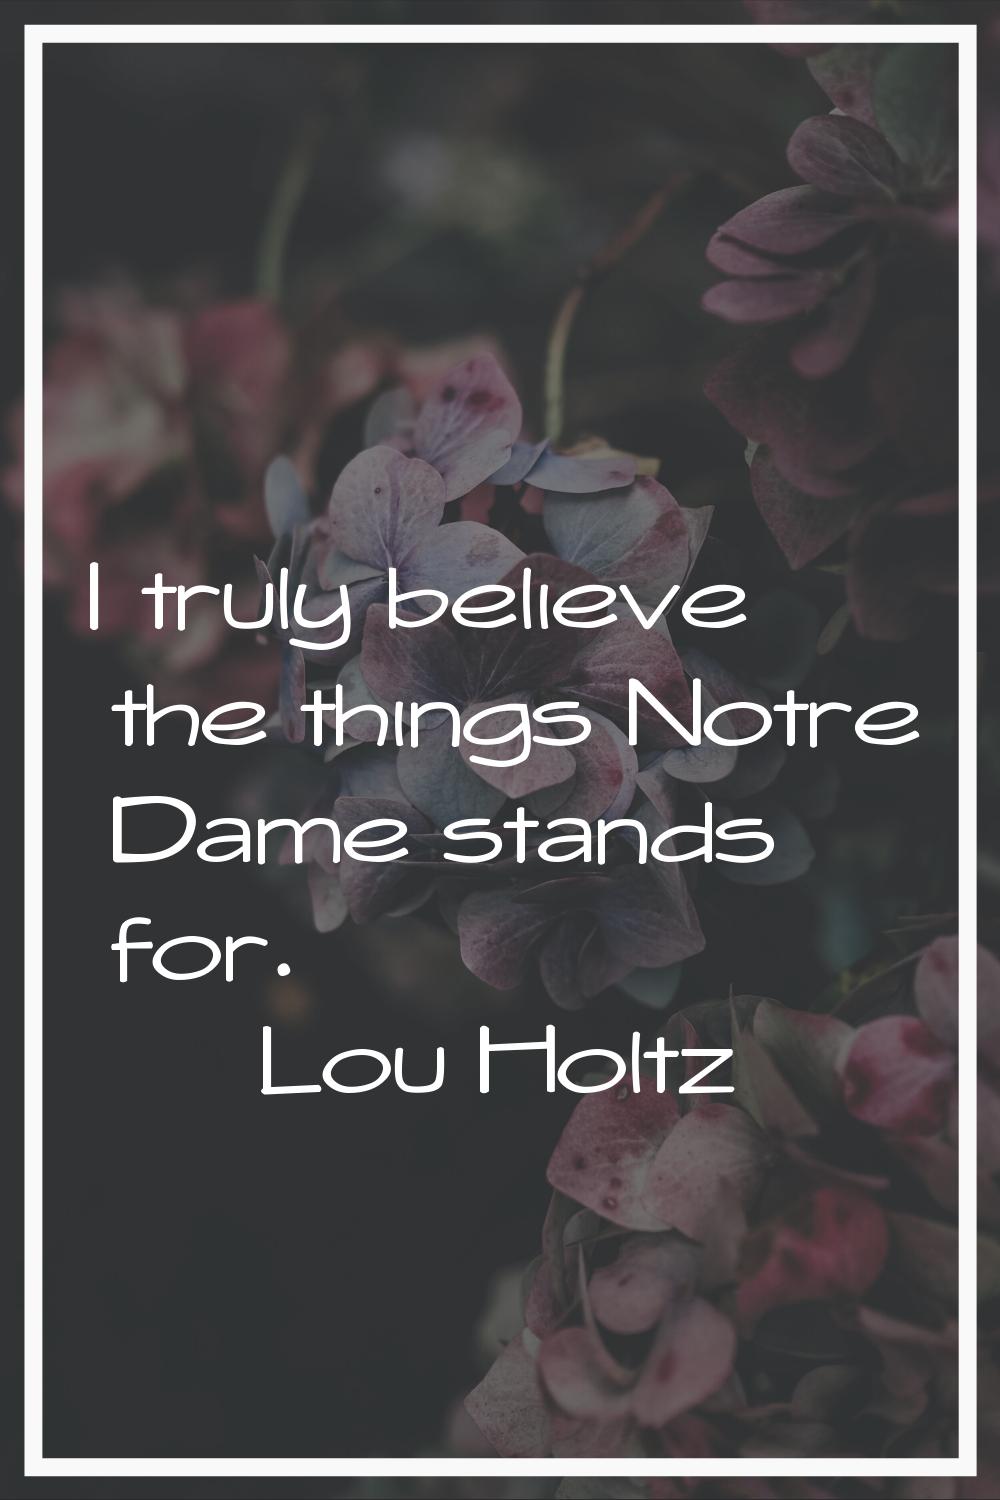 I truly believe the things Notre Dame stands for.